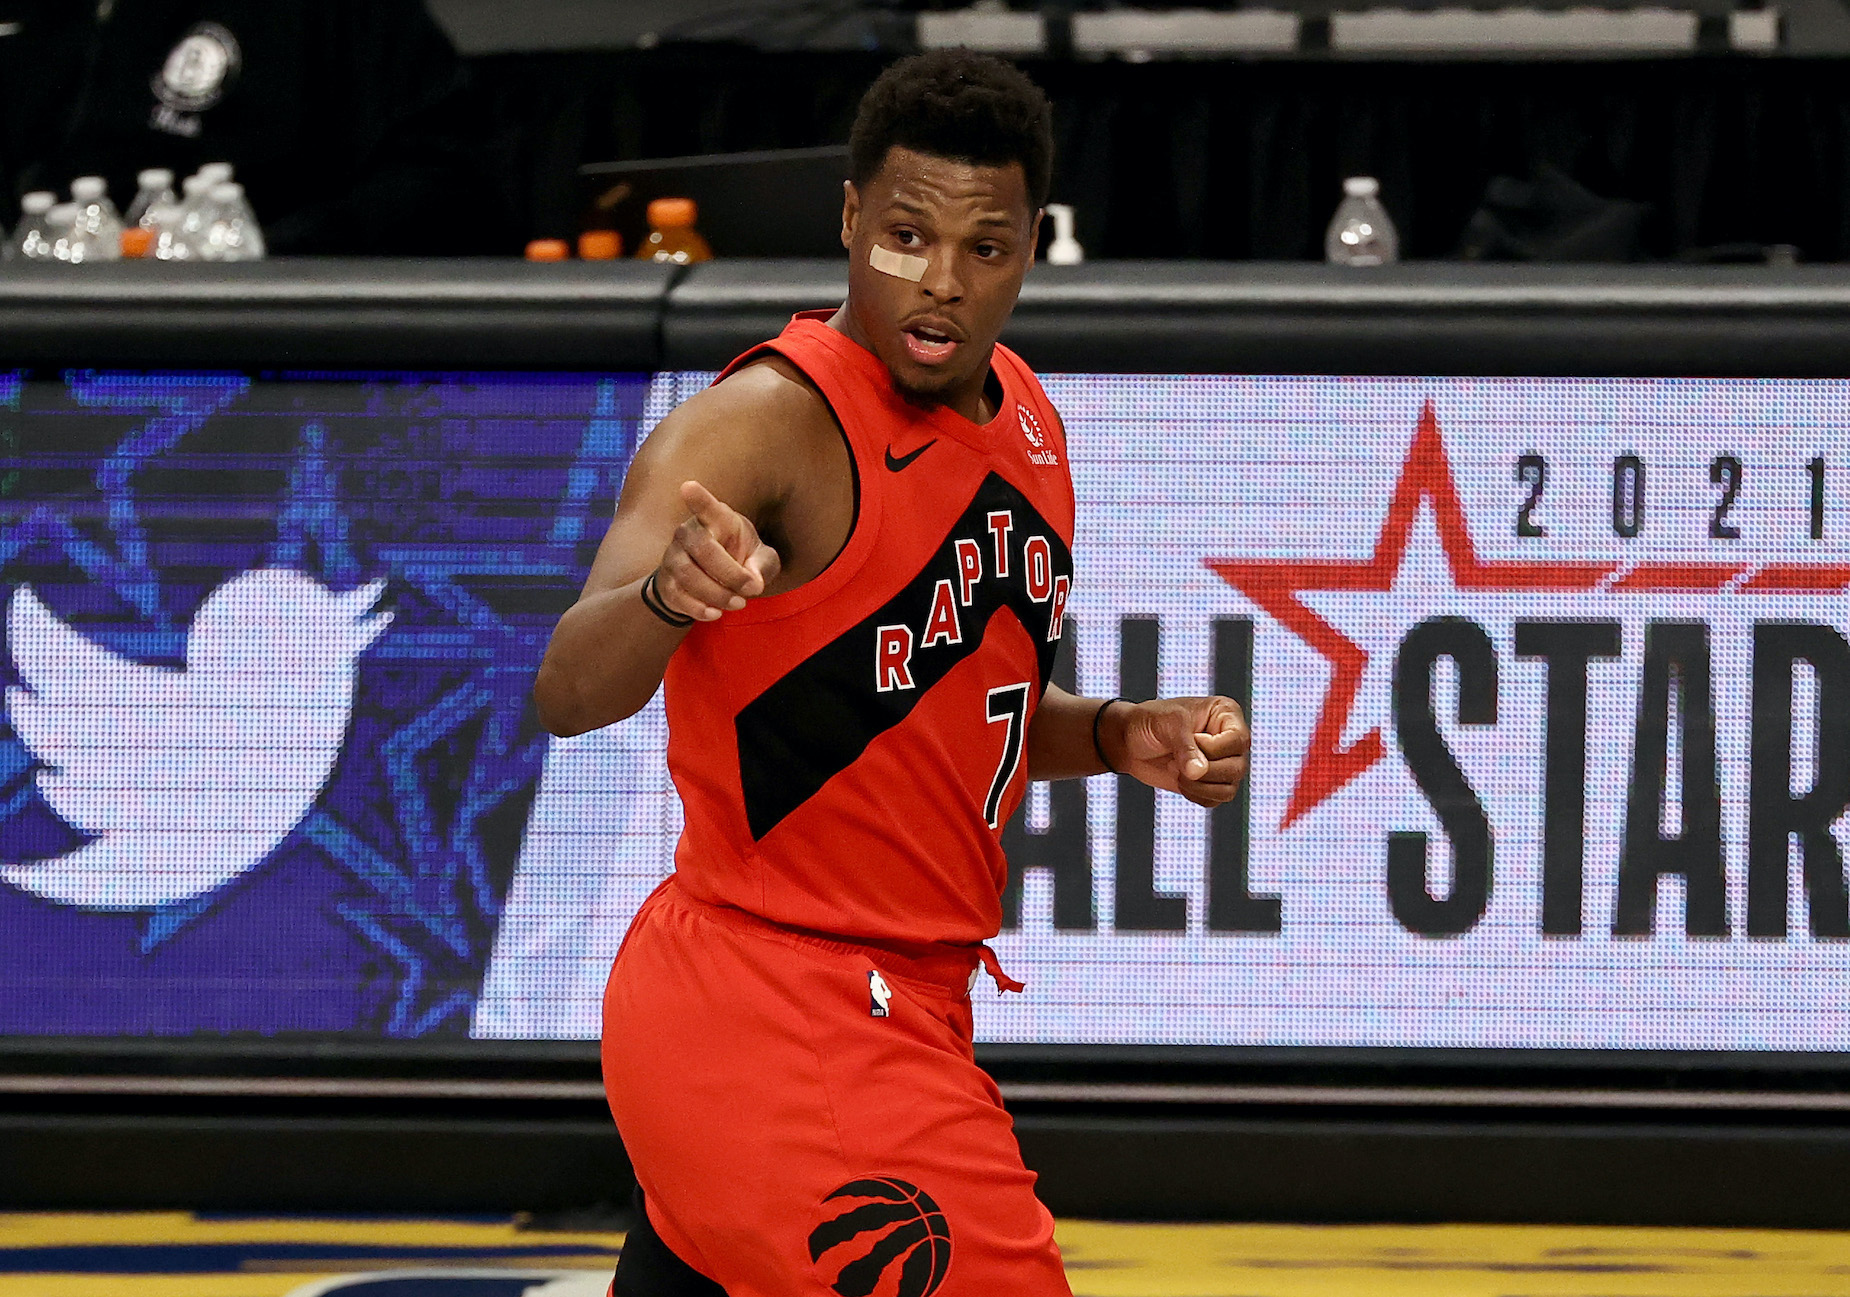 Kyle Lowry Once Found Himself Facing a Battery Charge After Things Got Heated During a Pickup Game